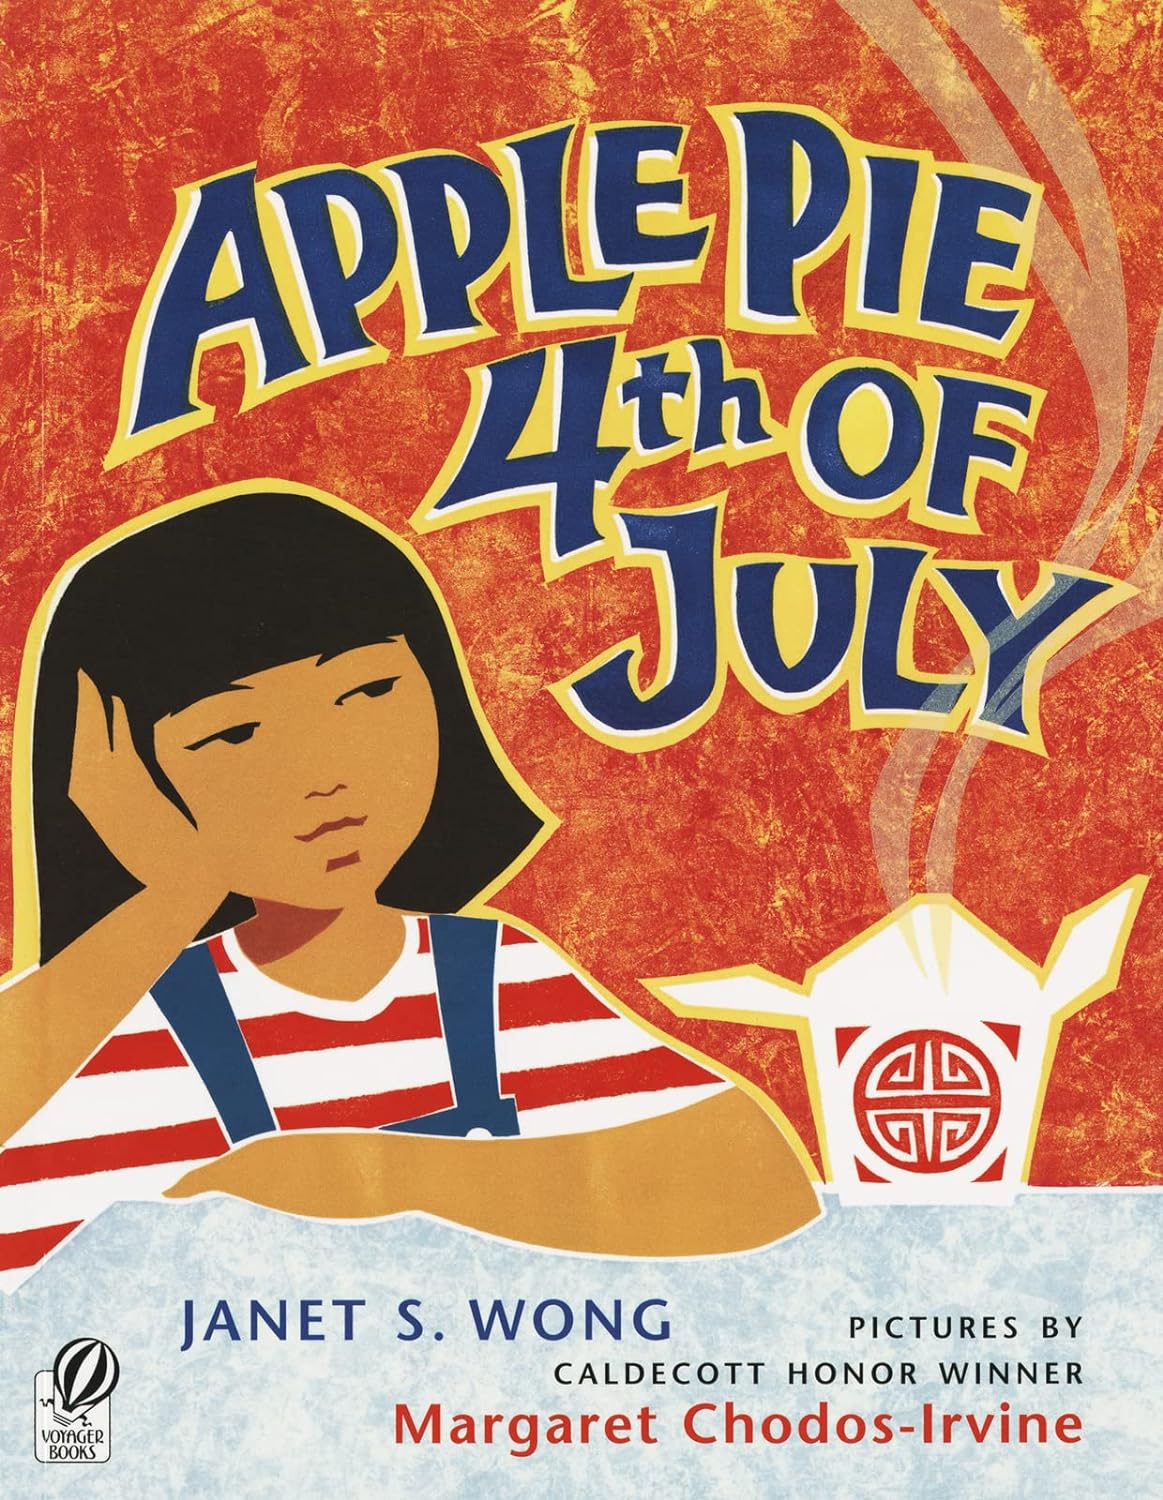 Apple Pie 4th of July by Janet S. Wong  - picture books for kids about Chinese American culture